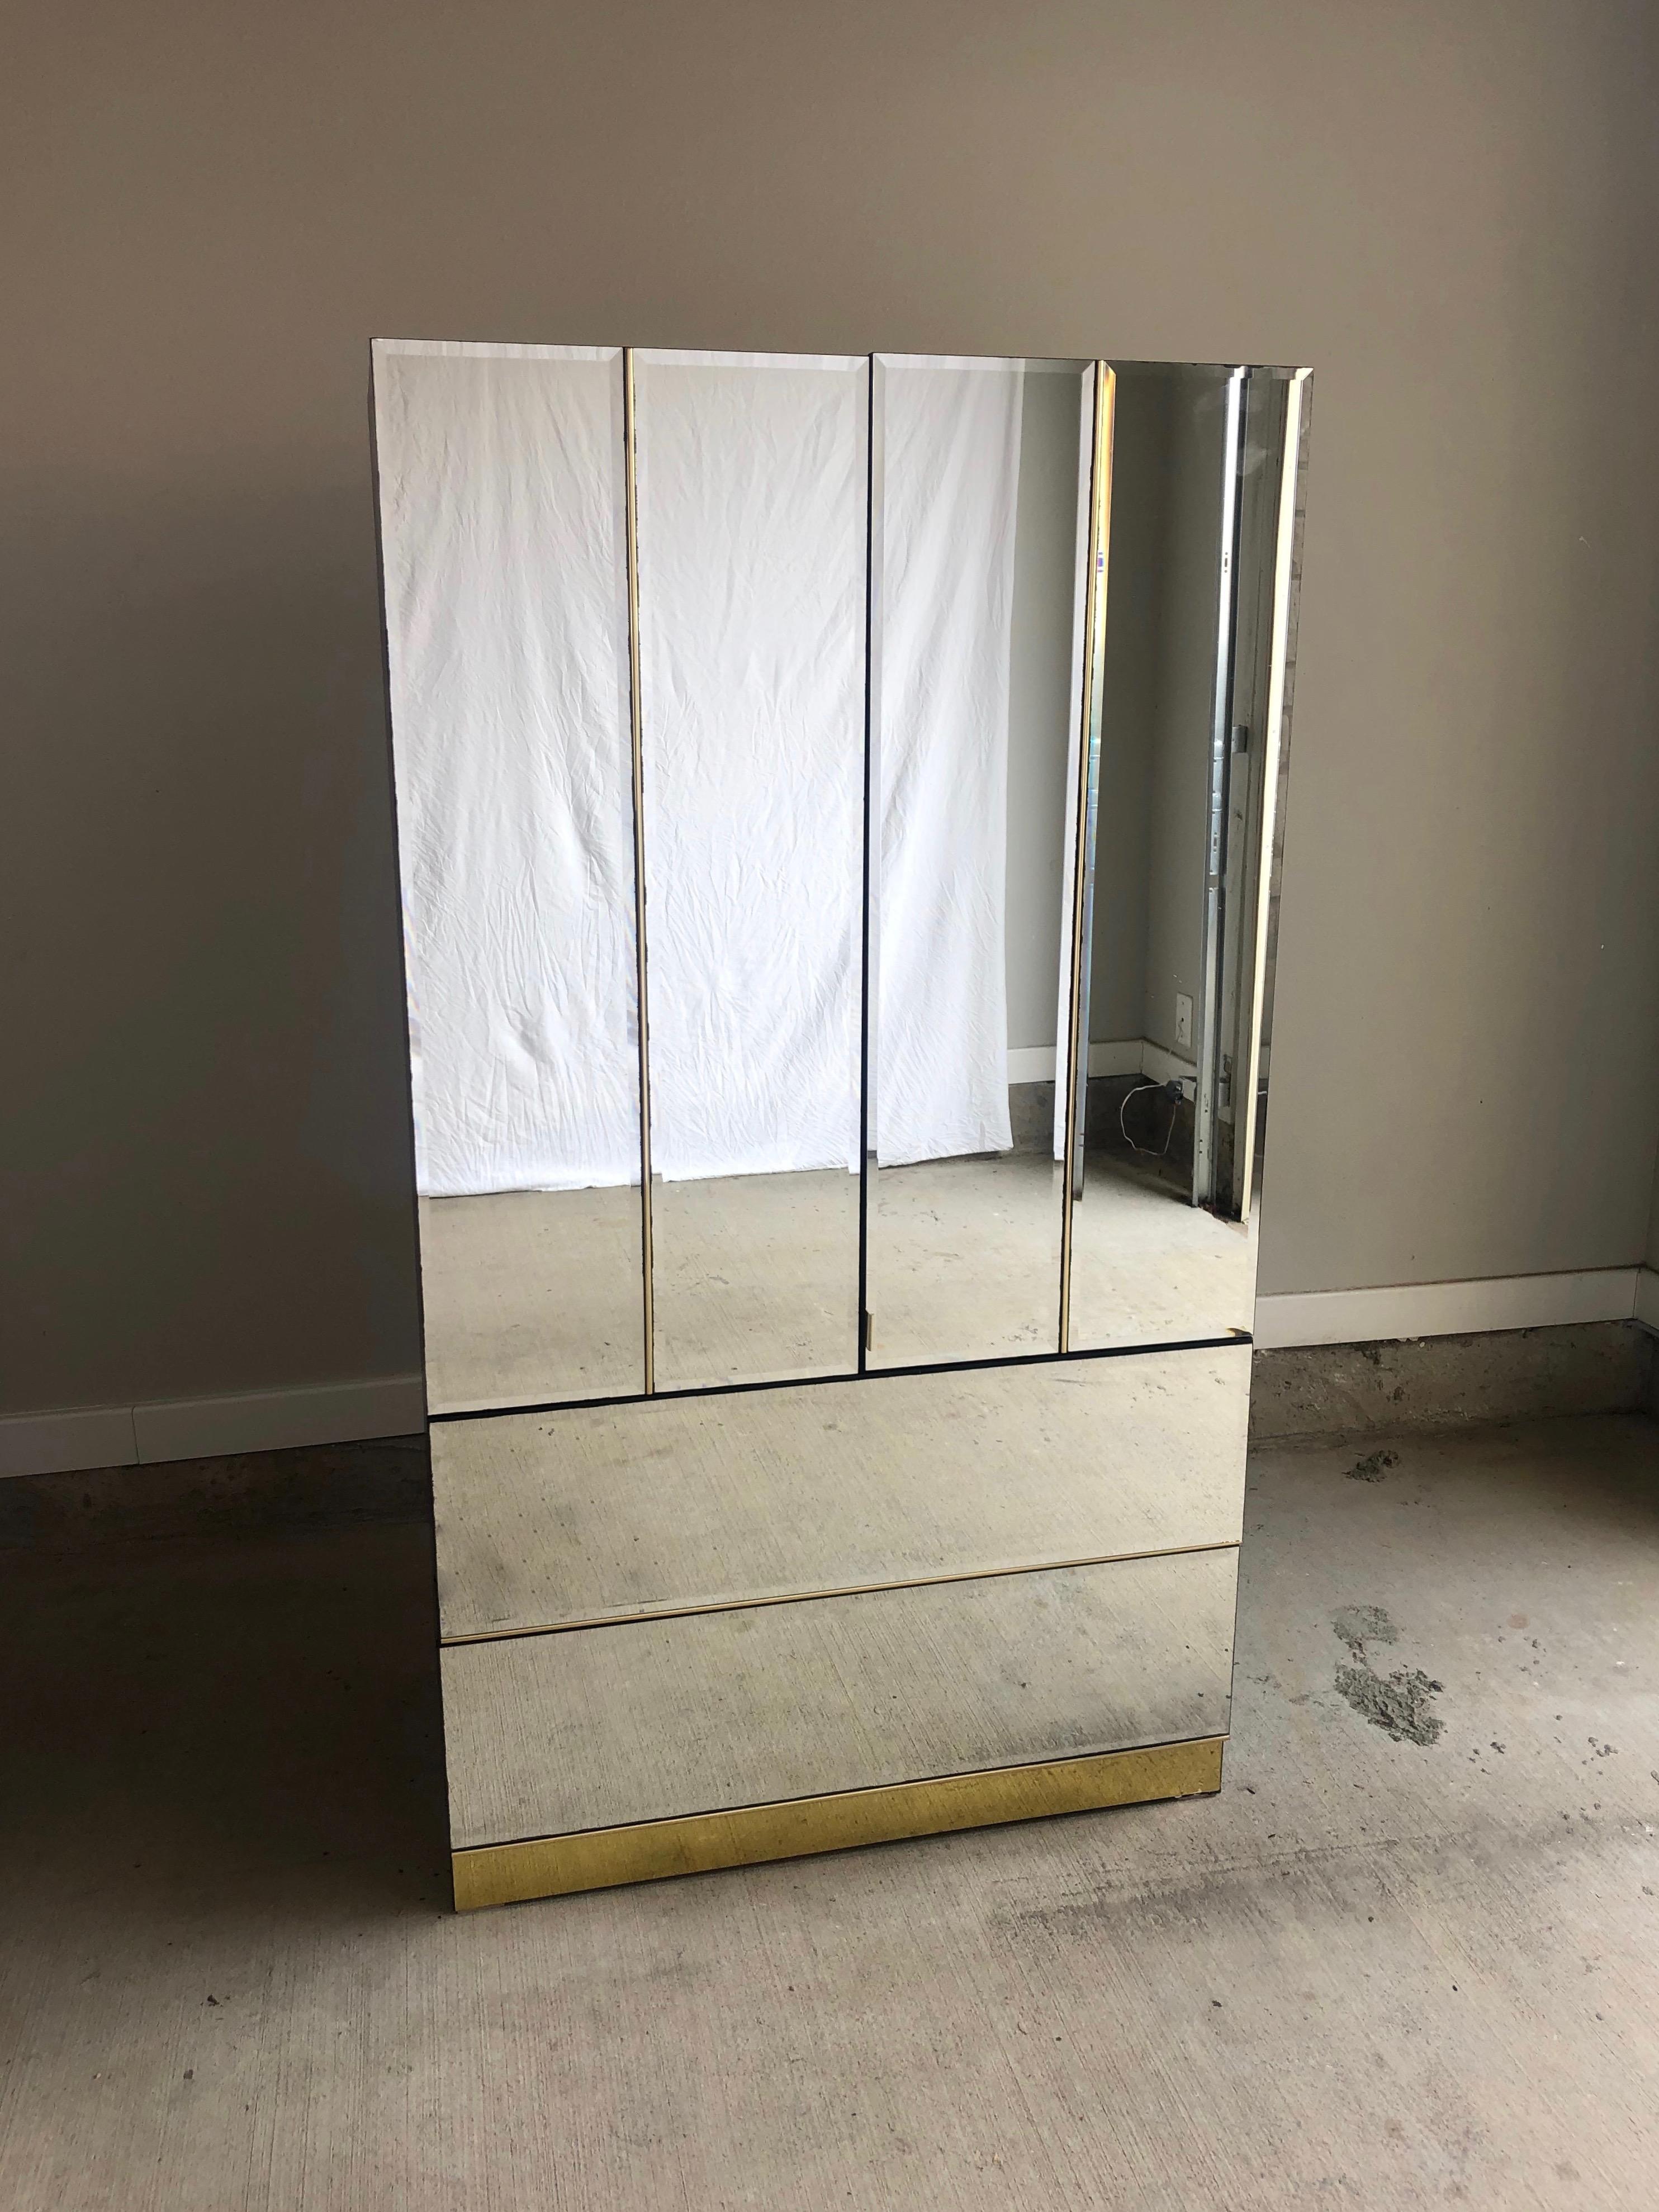 1980s mirrored armoire with brass accents in the style of Ello. Giant storage space for clothes, shoes, and purses while also a full size functional mirror.